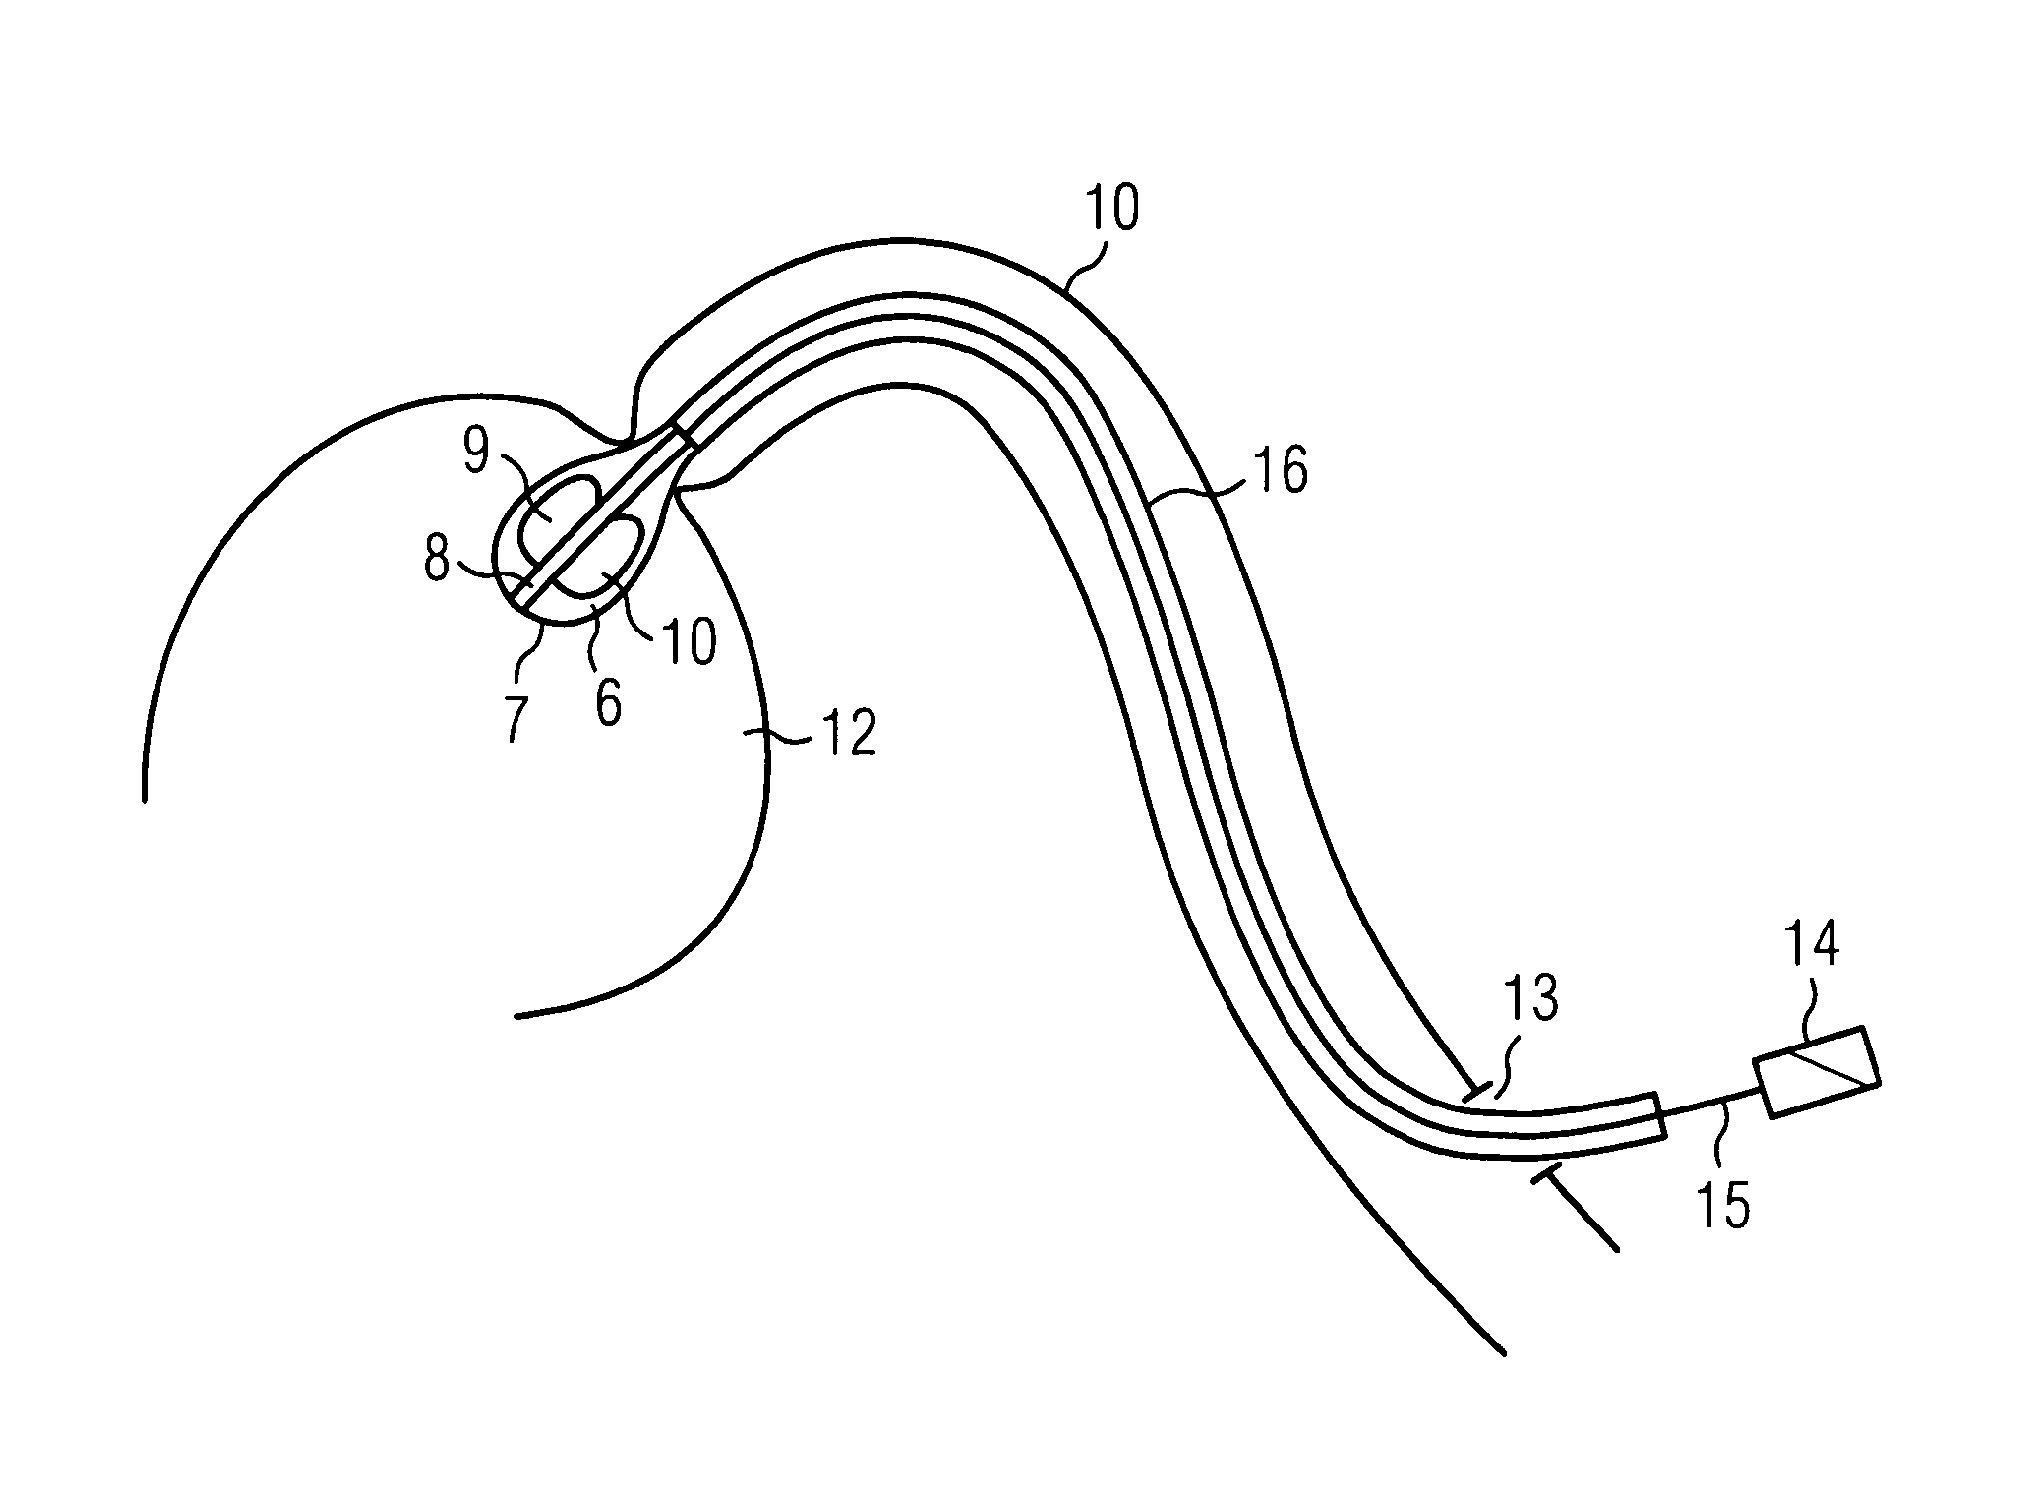 Pump or rotary cutter for operation in a fluid